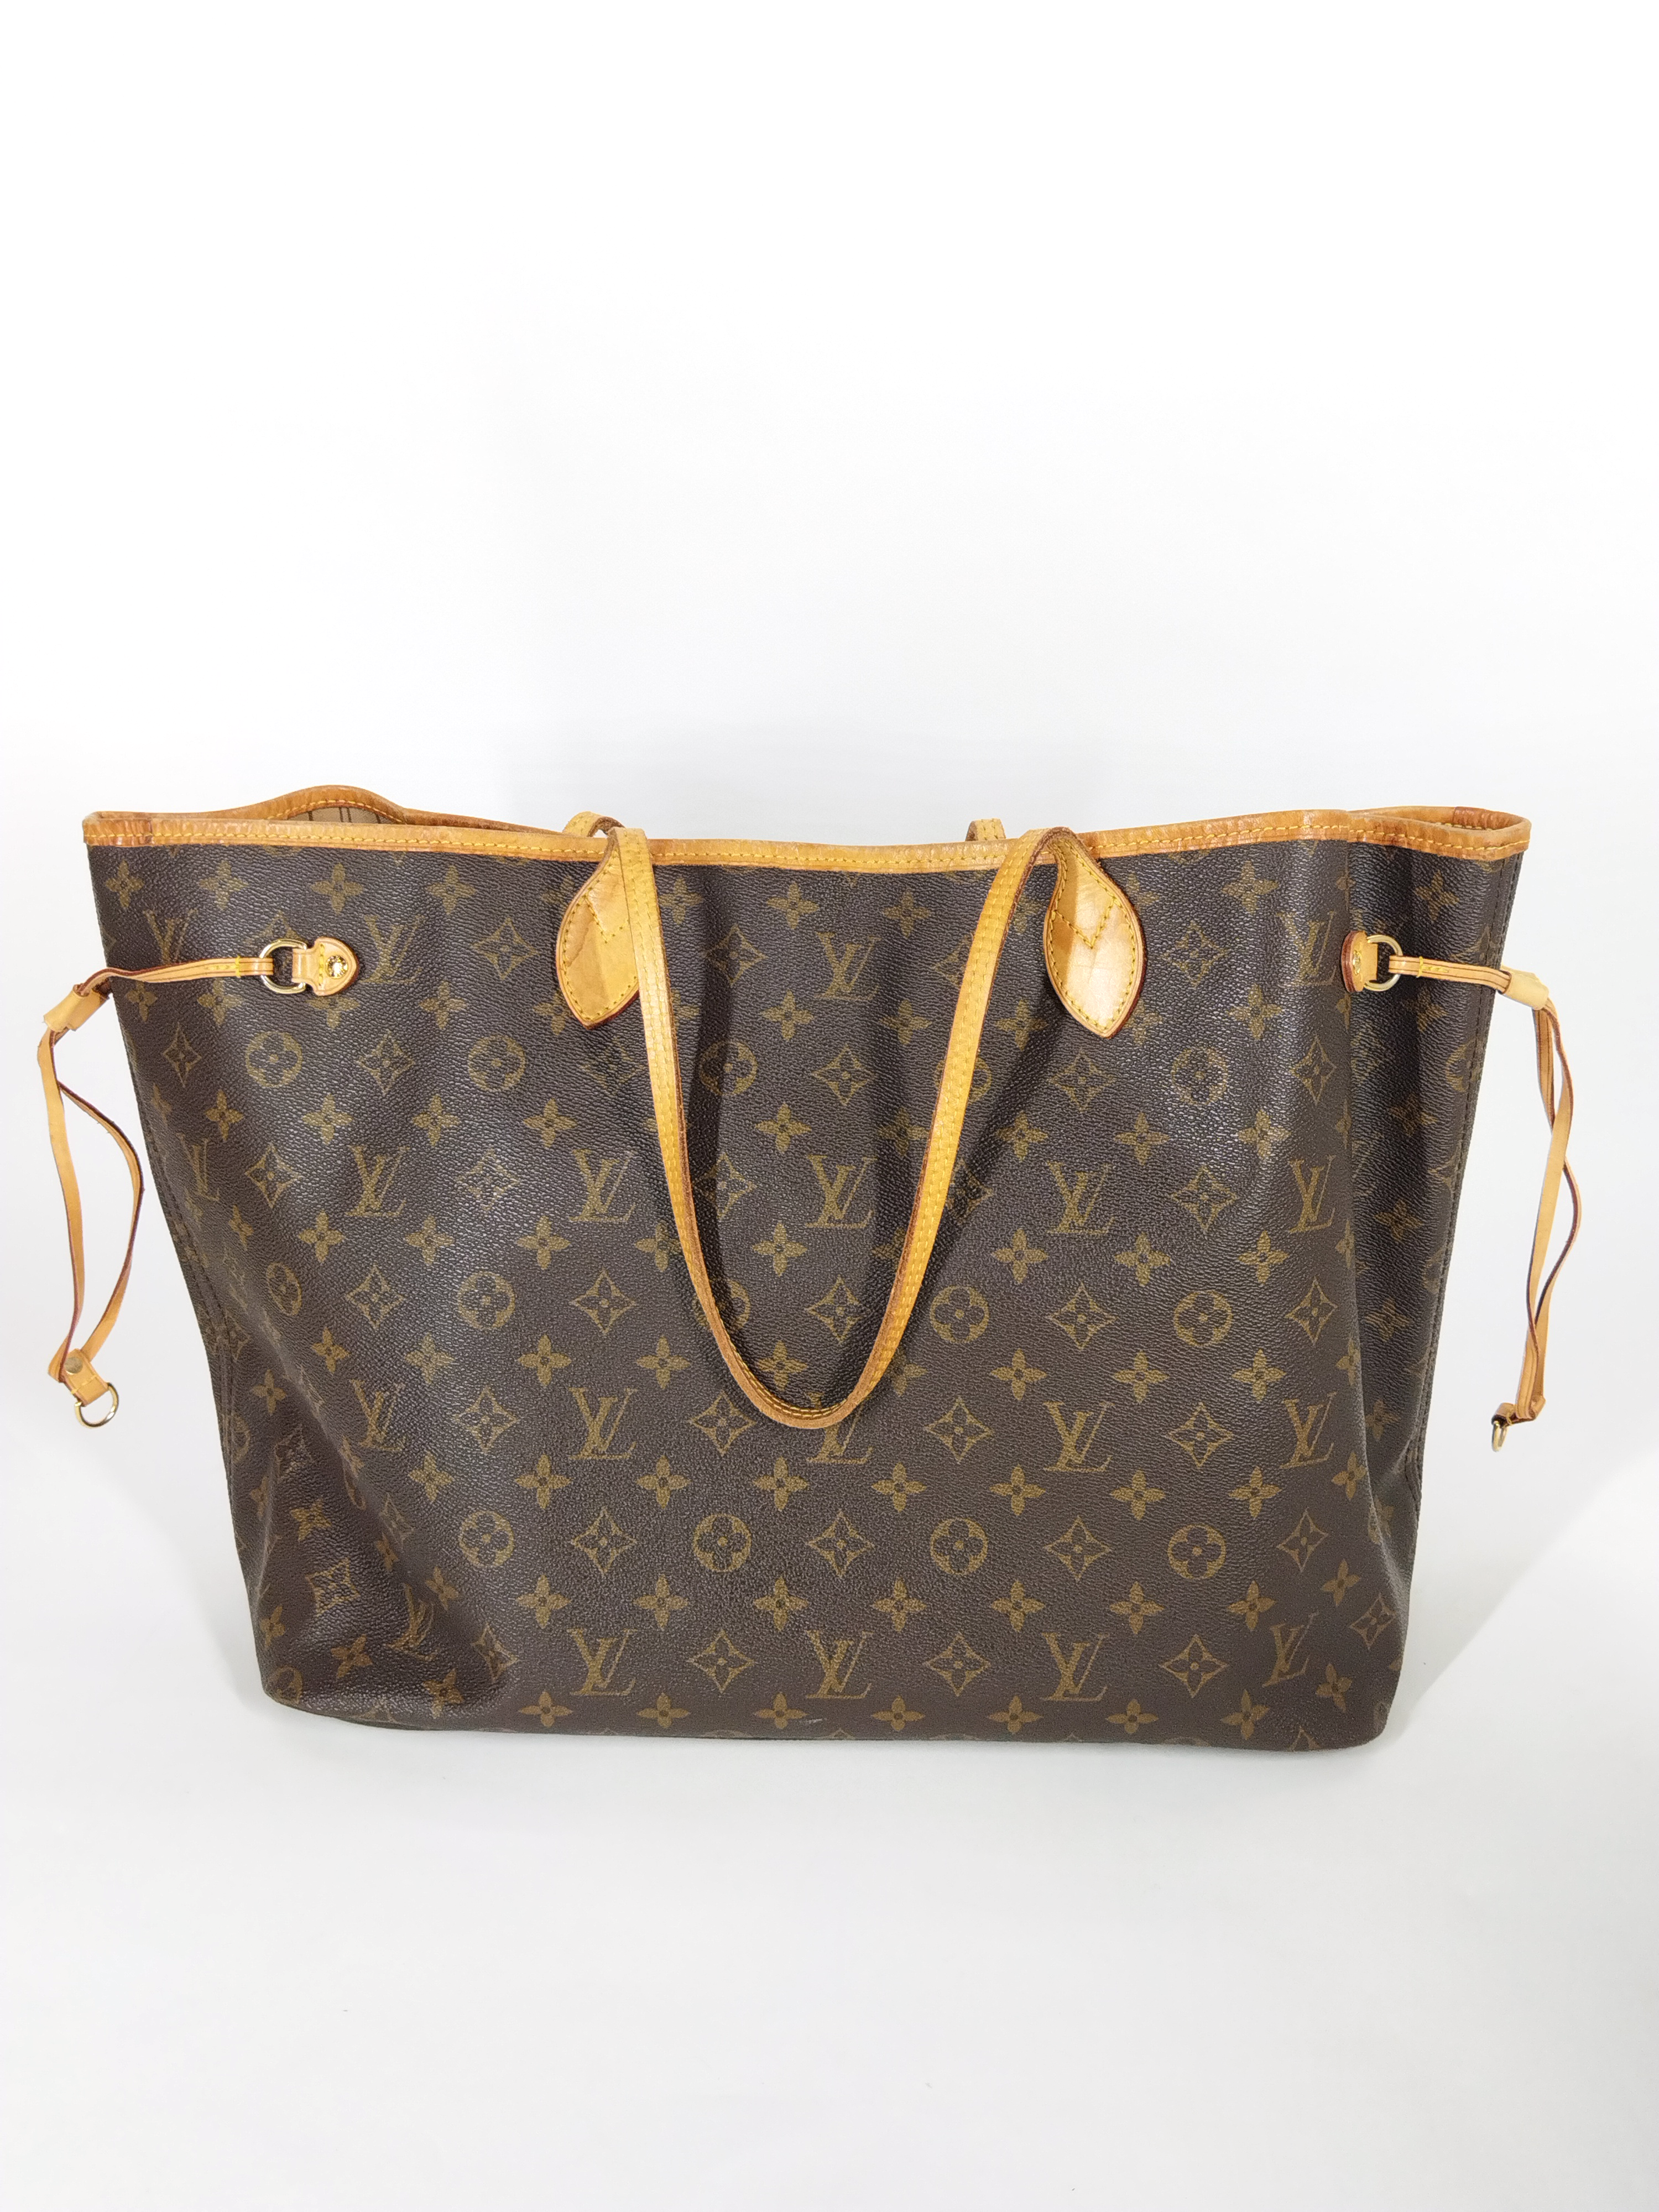 Gold textured louis vuitton neverfull purse with lv logo